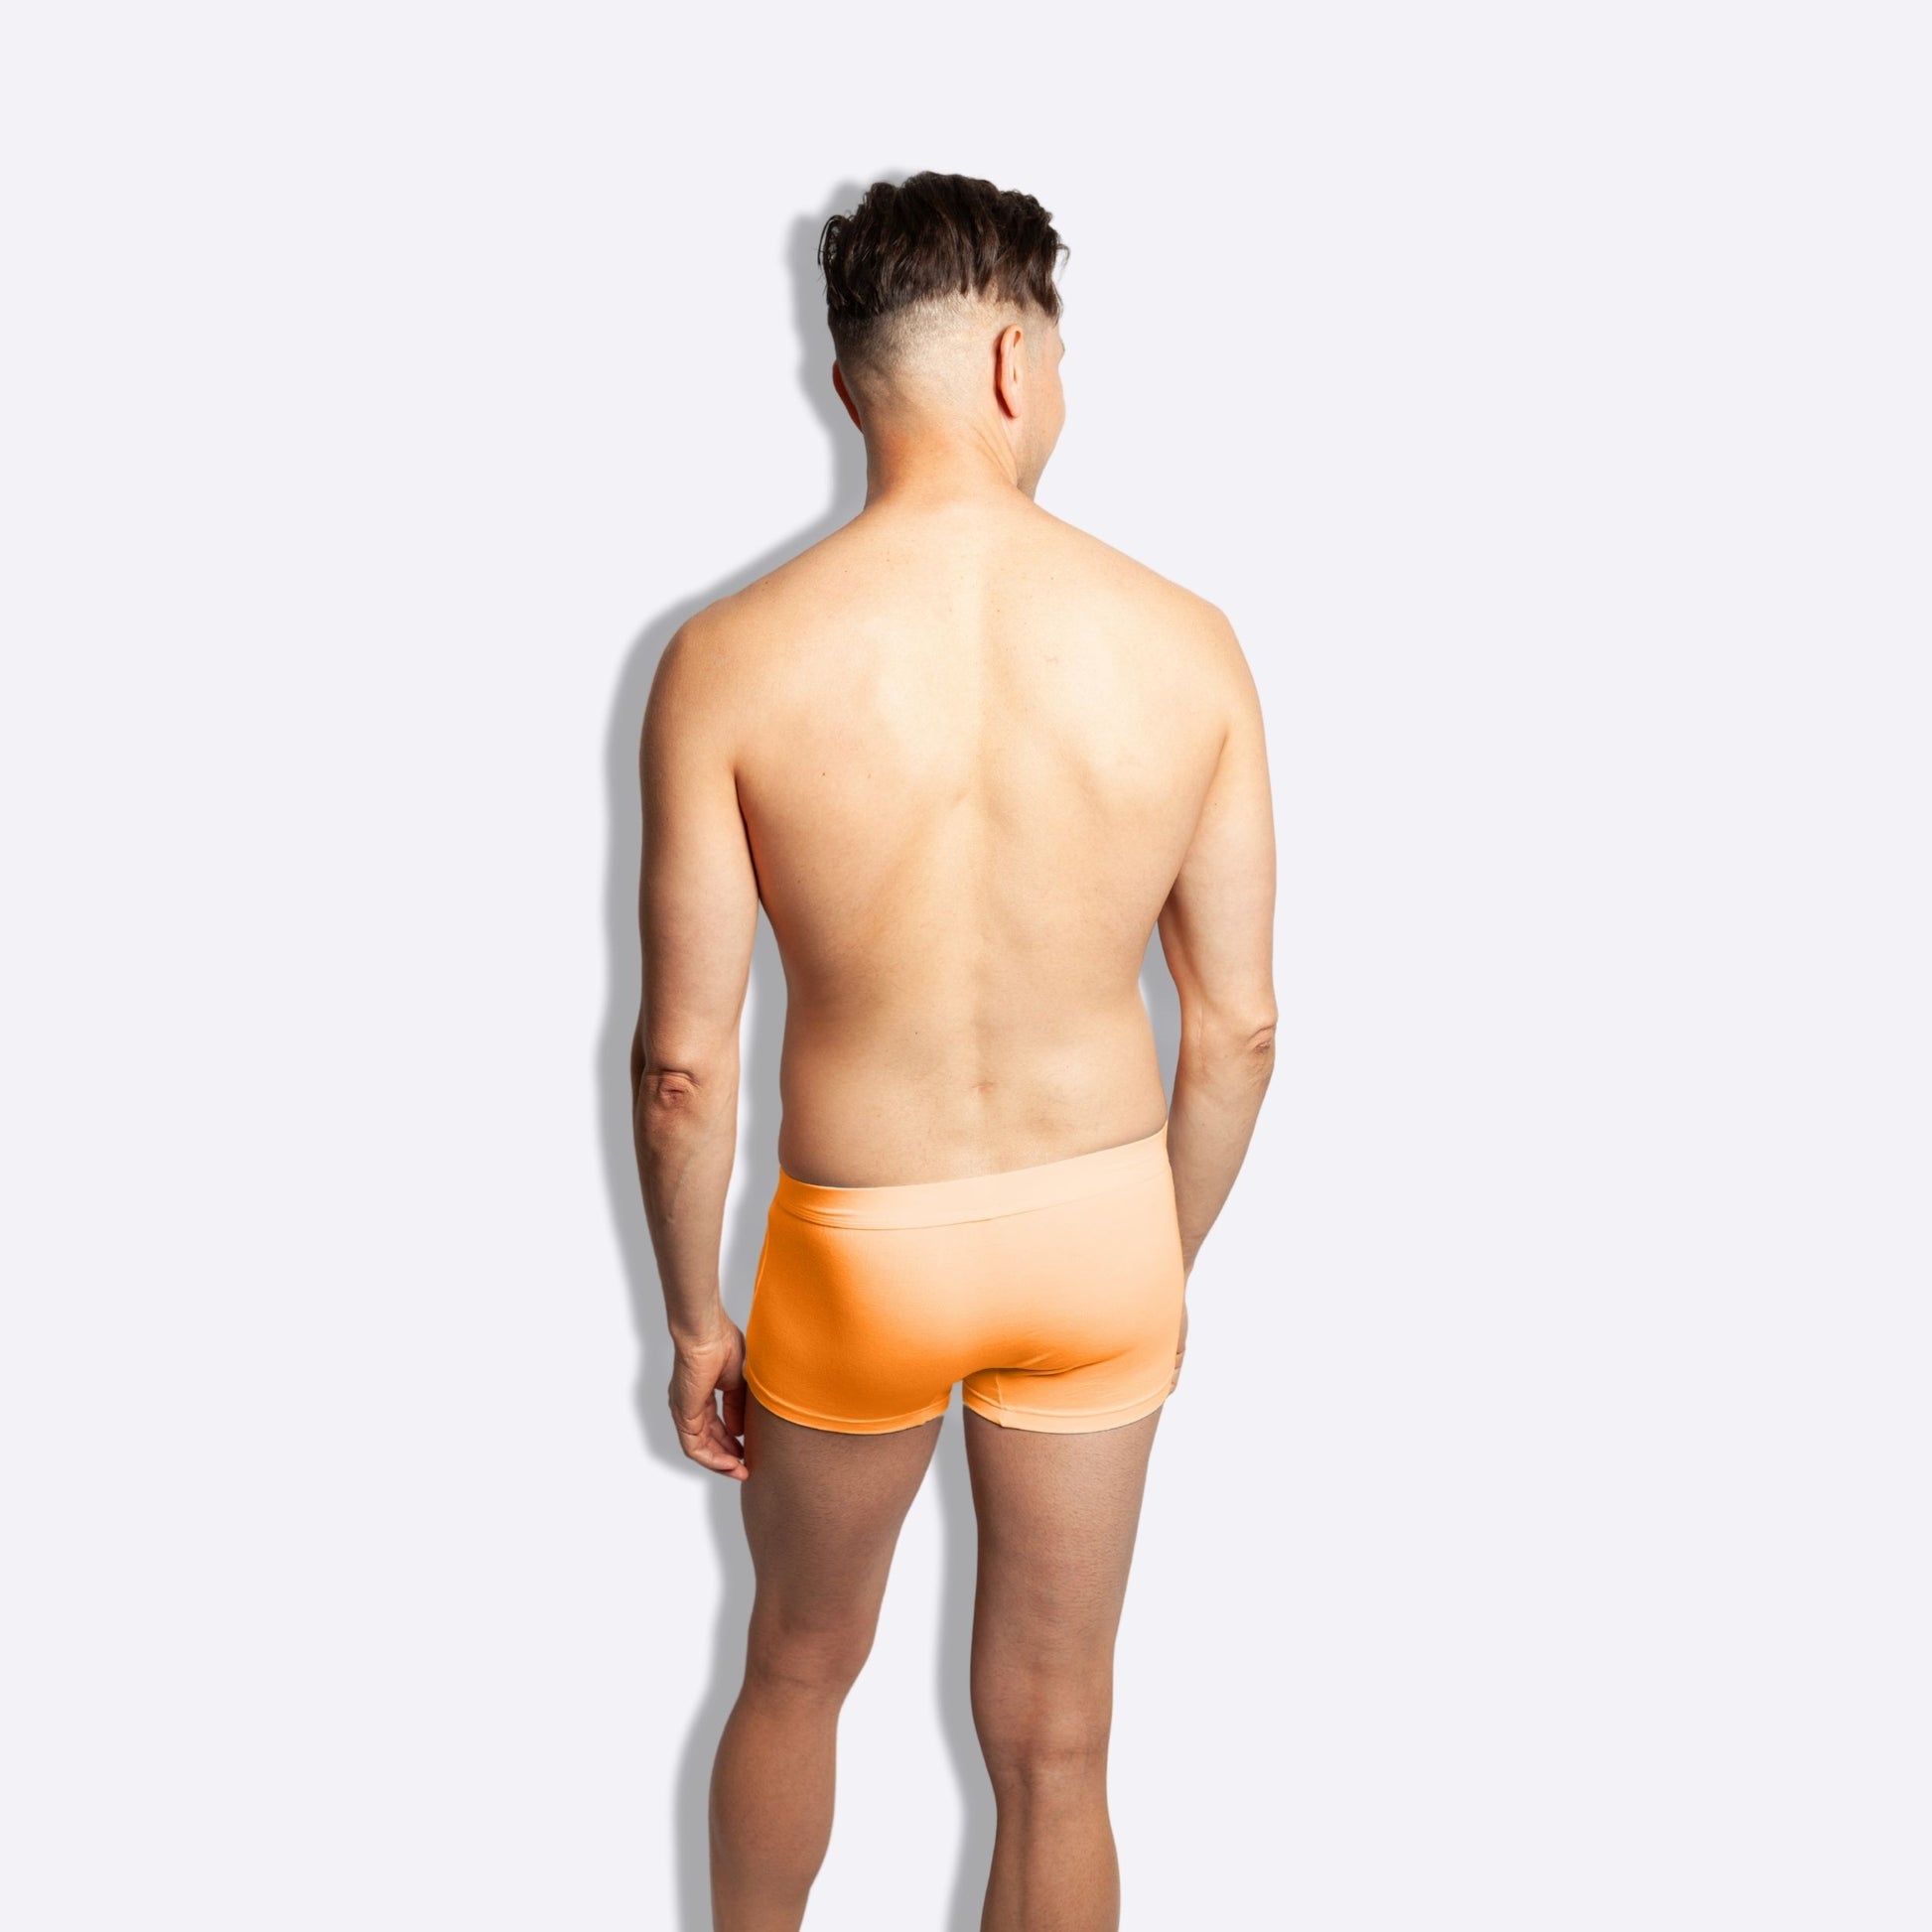 The Limited Edition Citrus Orange Trunks for men in the USA and Canada